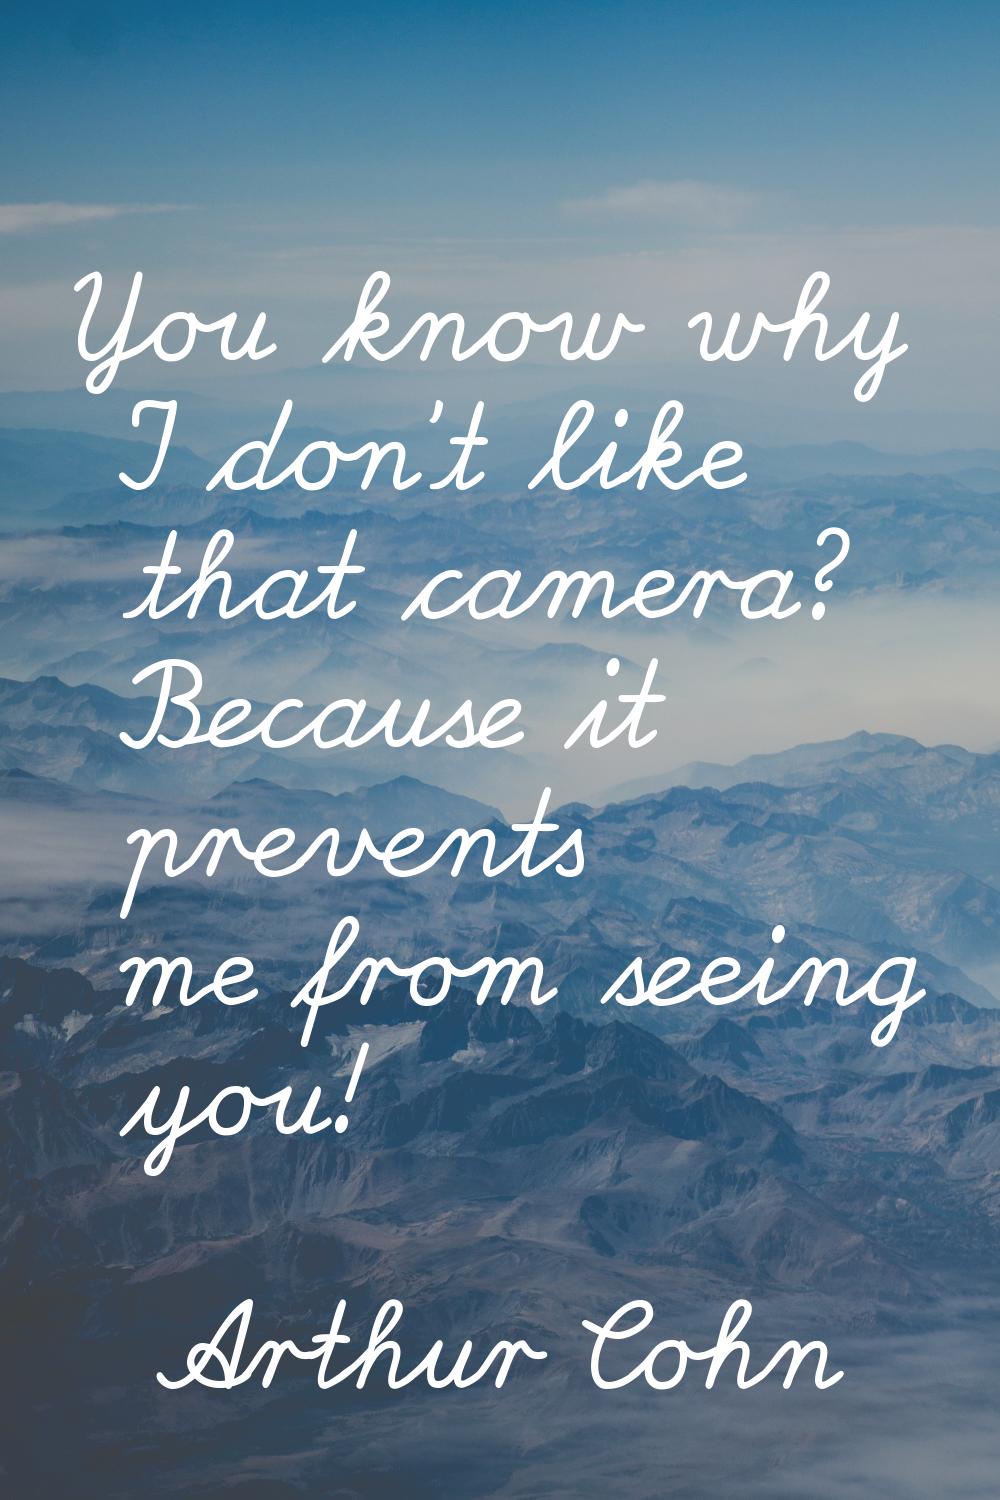 You know why I don't like that camera? Because it prevents me from seeing you!